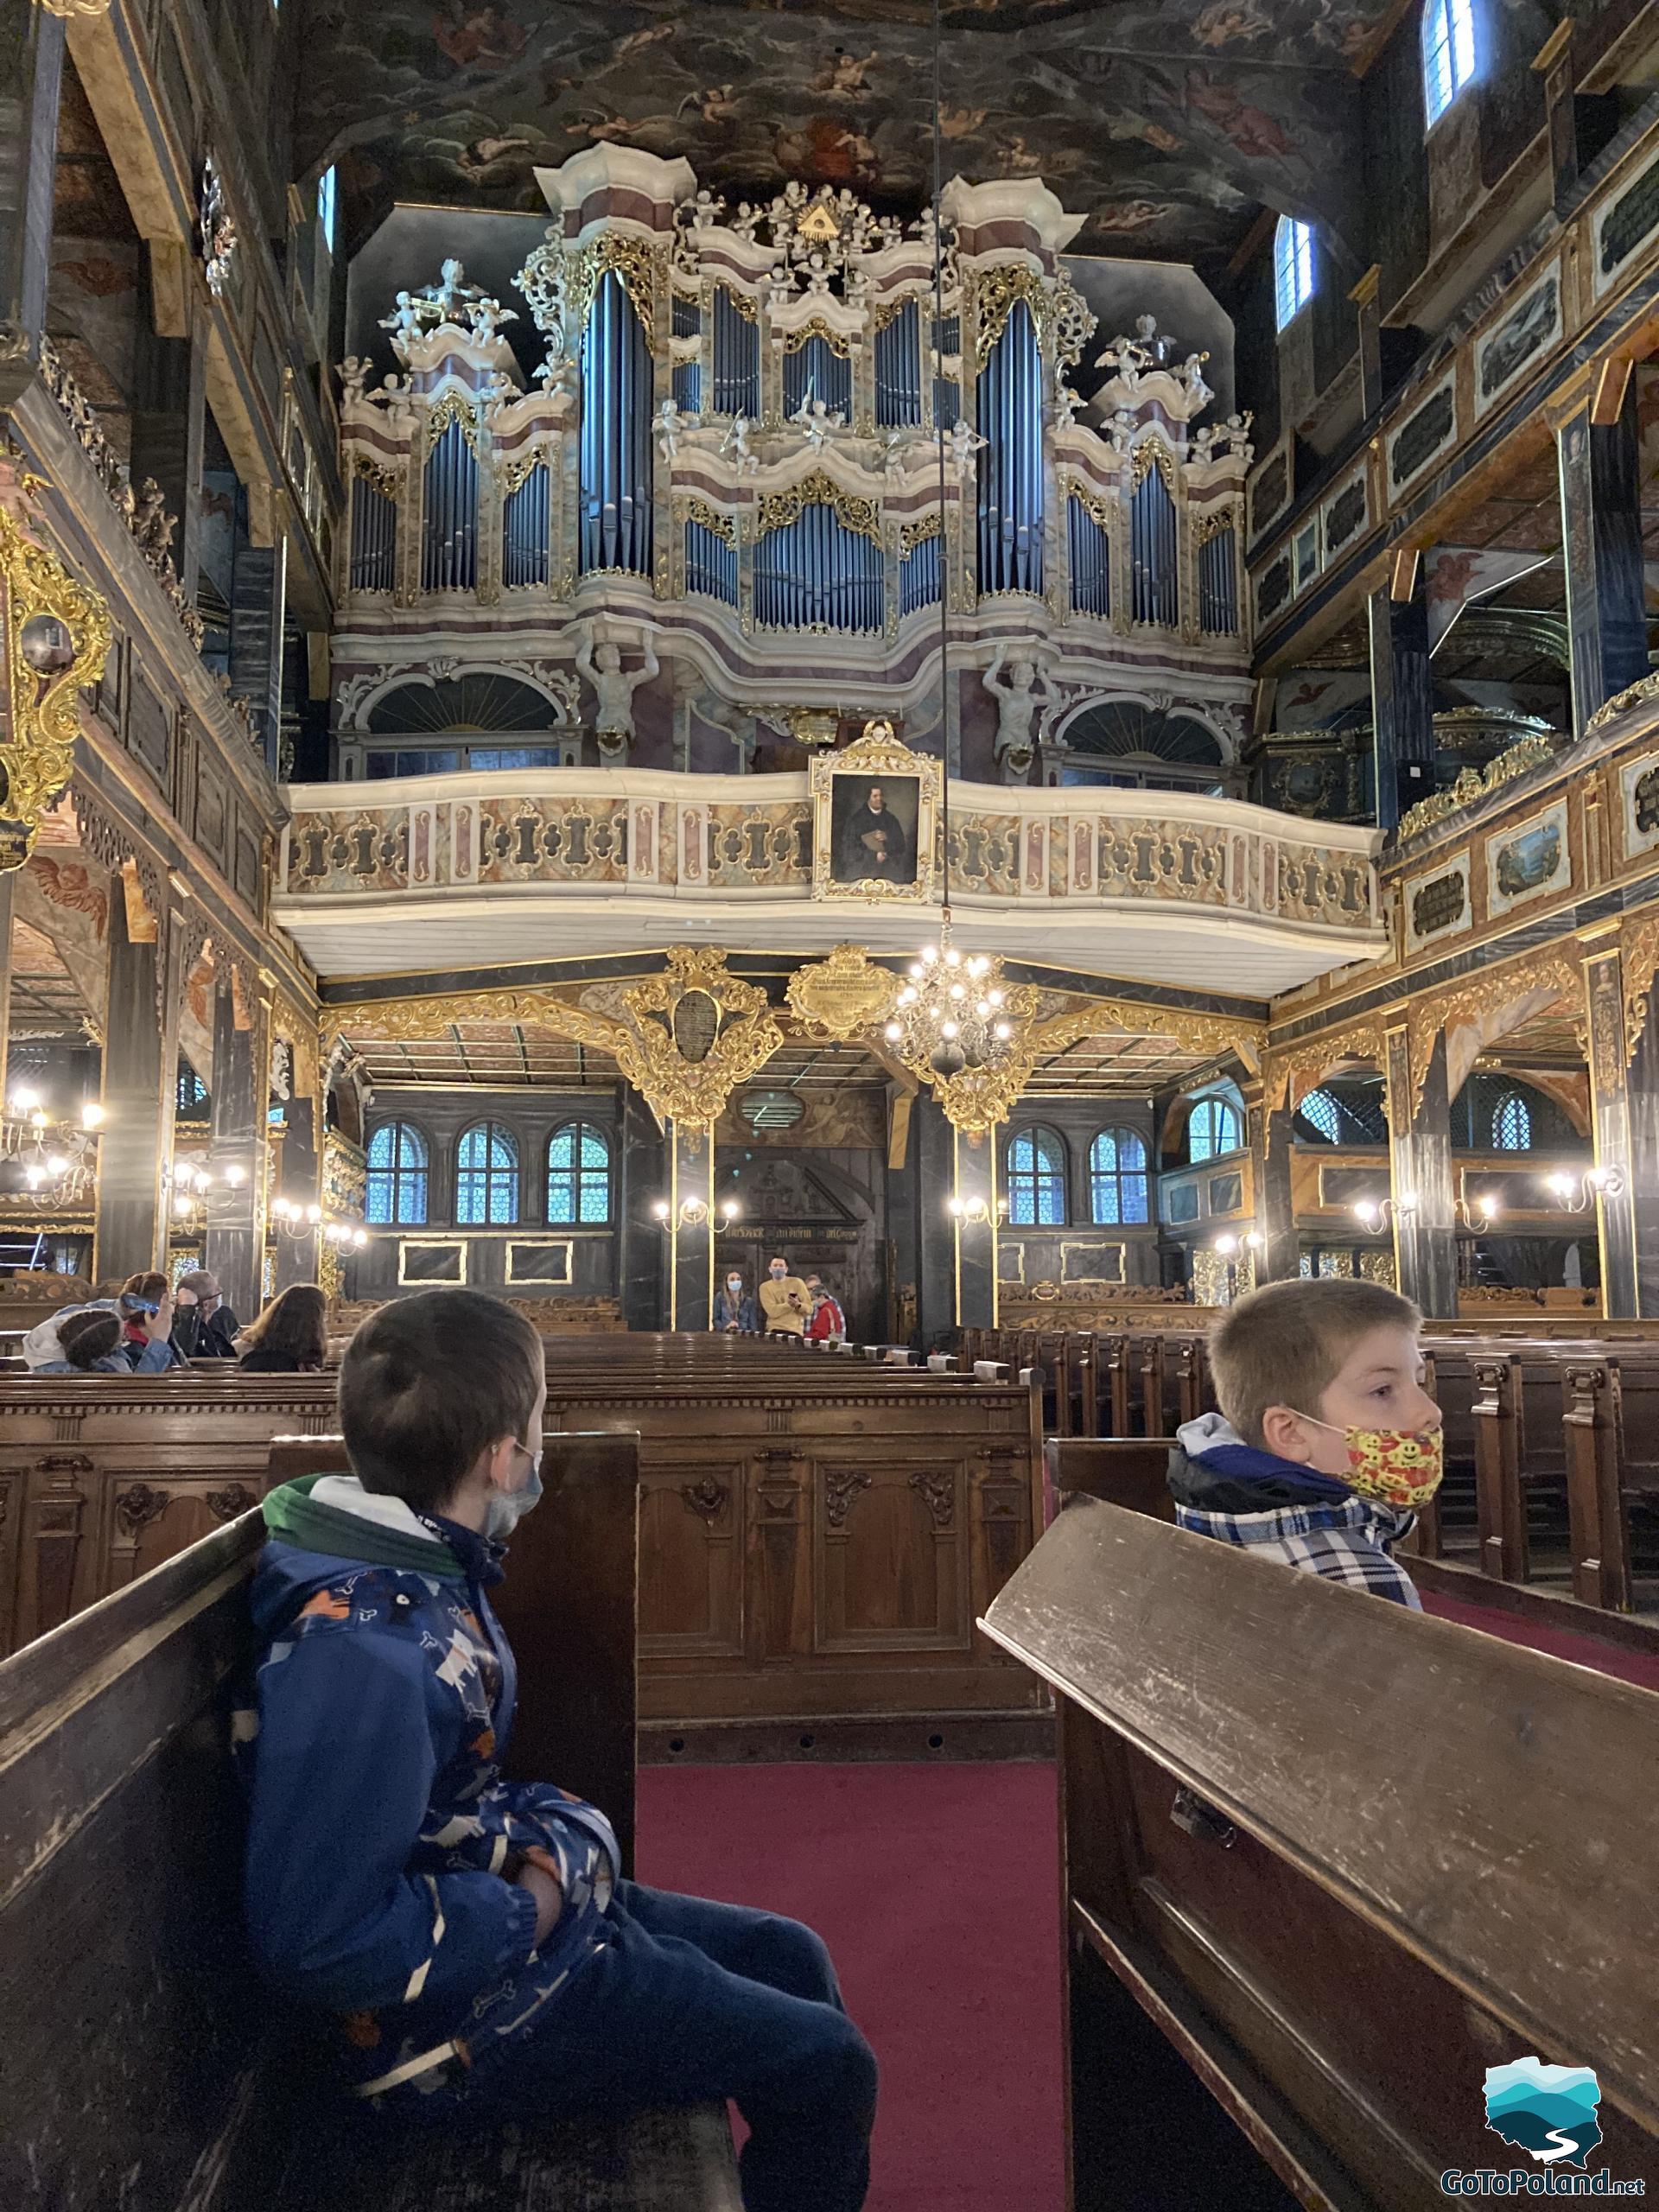 two boy are sitting in the wooden bench, a large organ in the background 